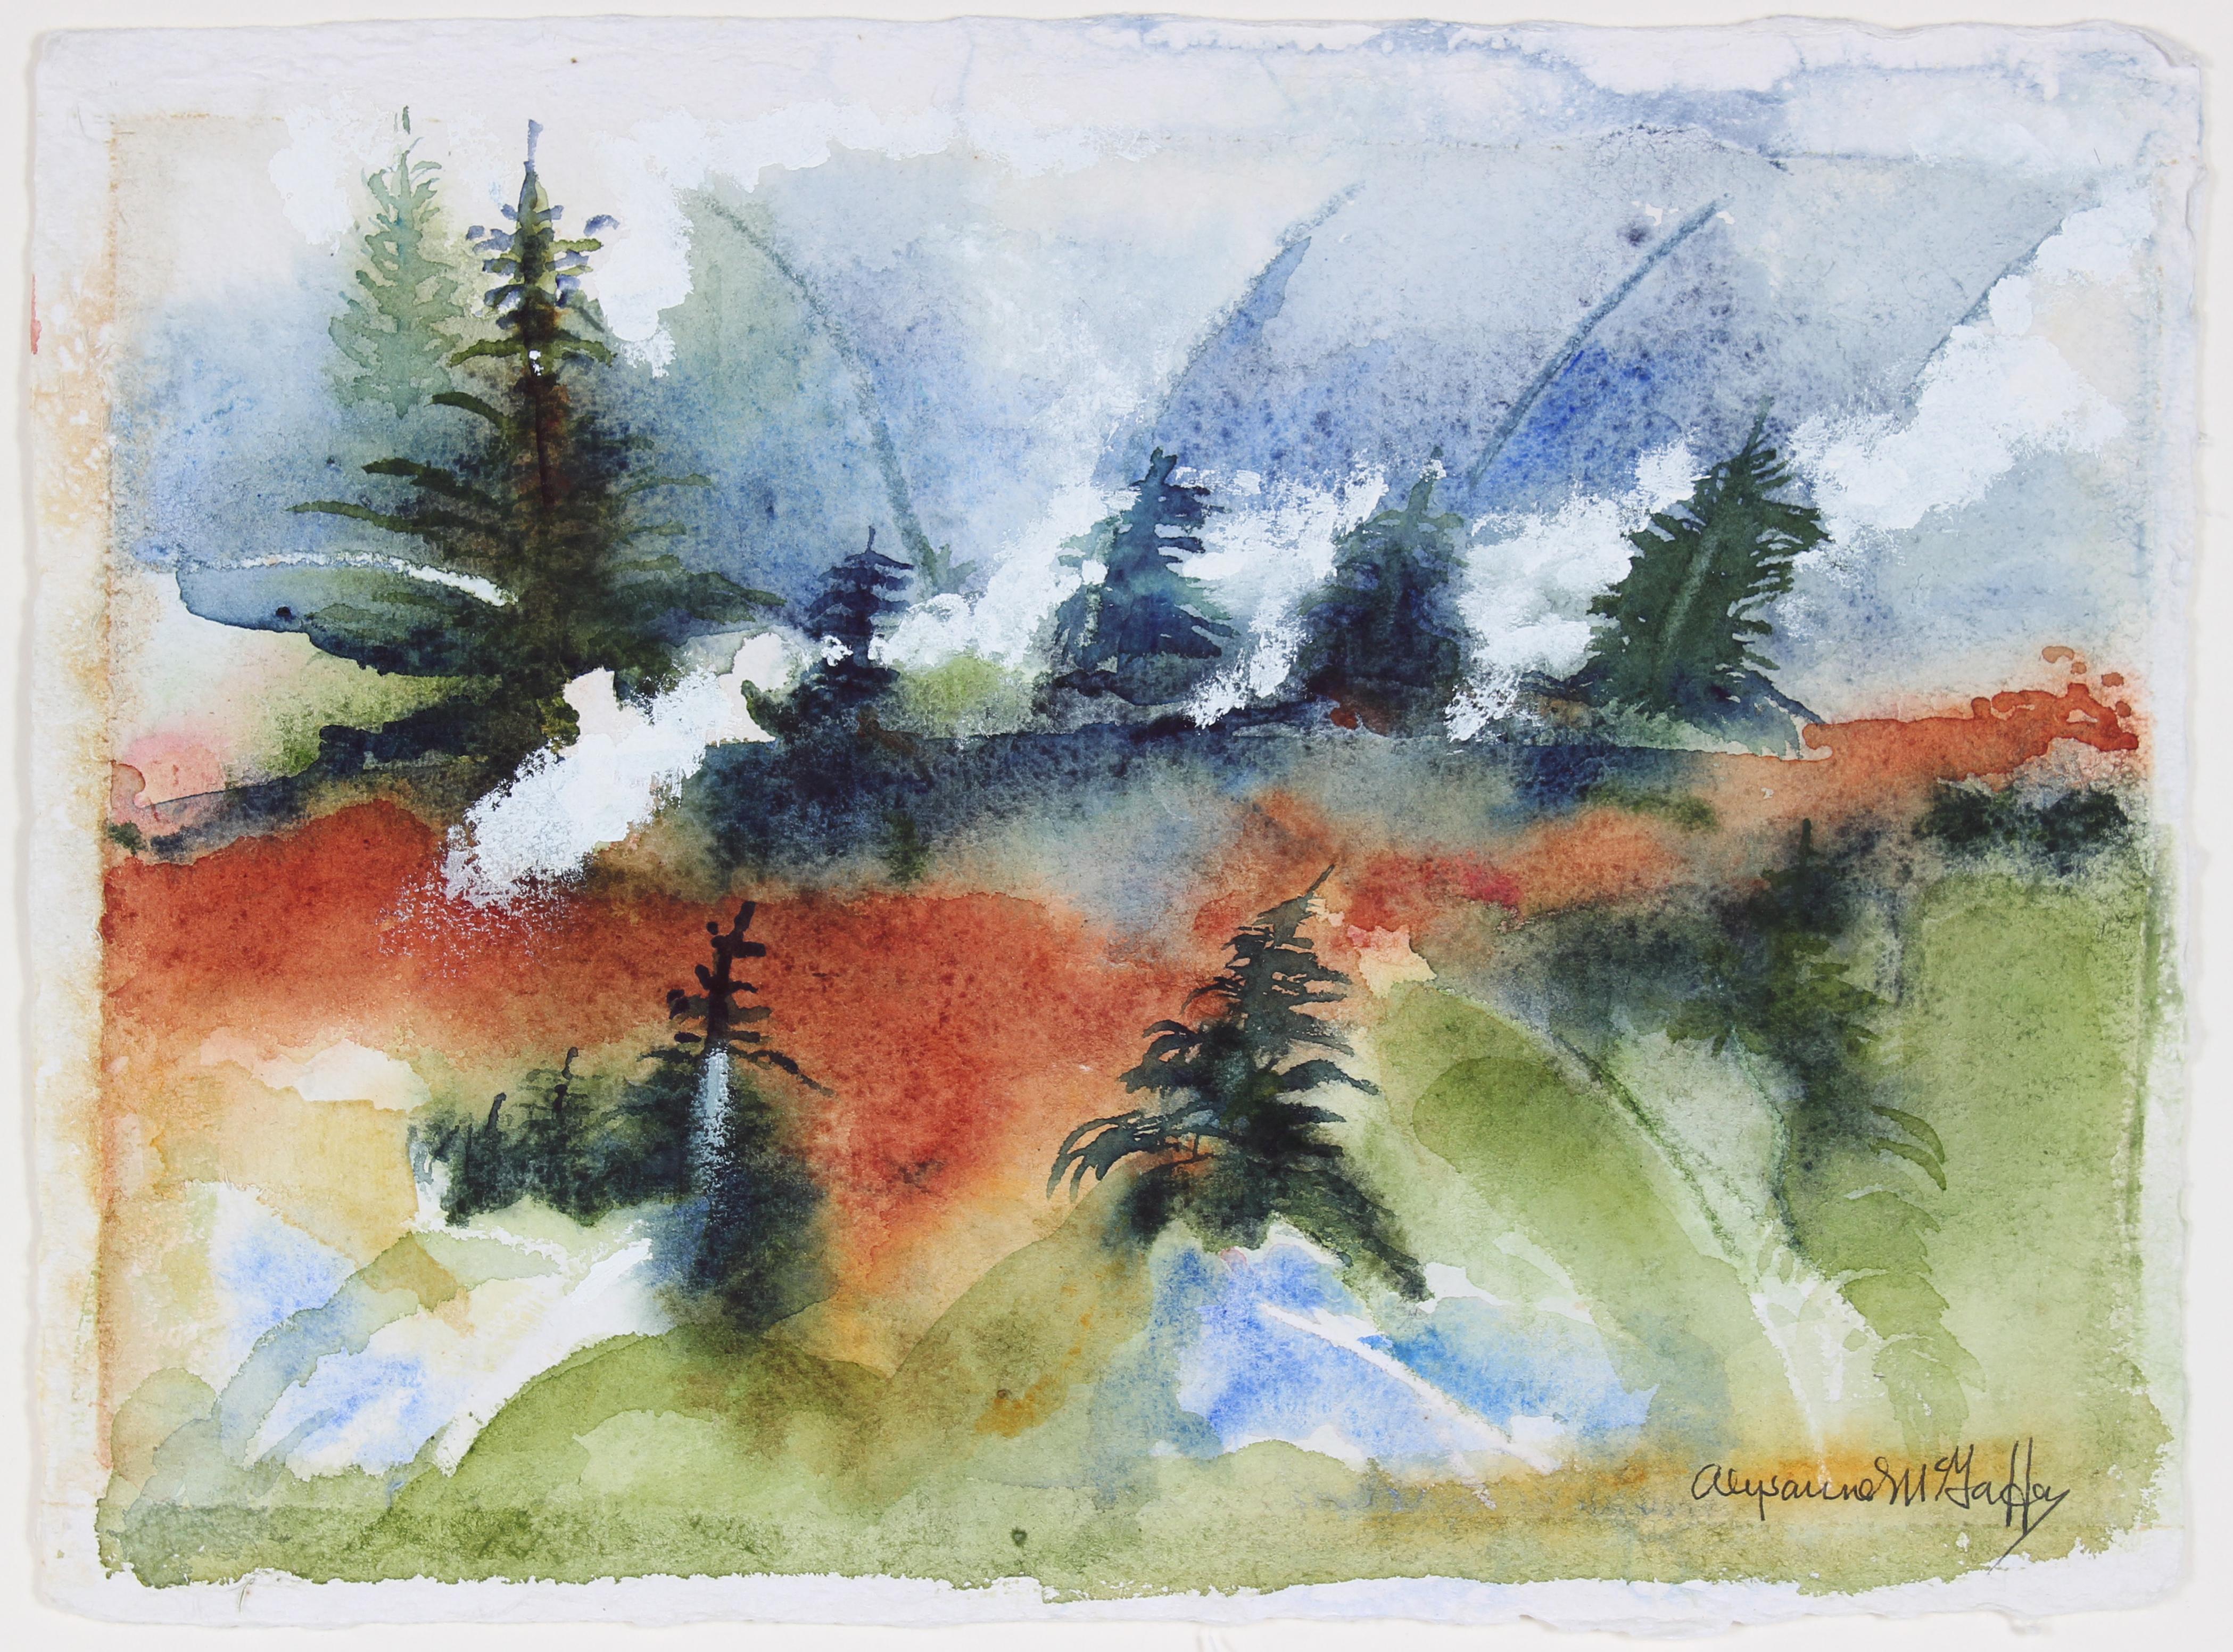 Alysanne McGaffey Abstract Drawing - "Forest Hills, Sonoma County, CA" Watercolor Landscape, Late 20th Century